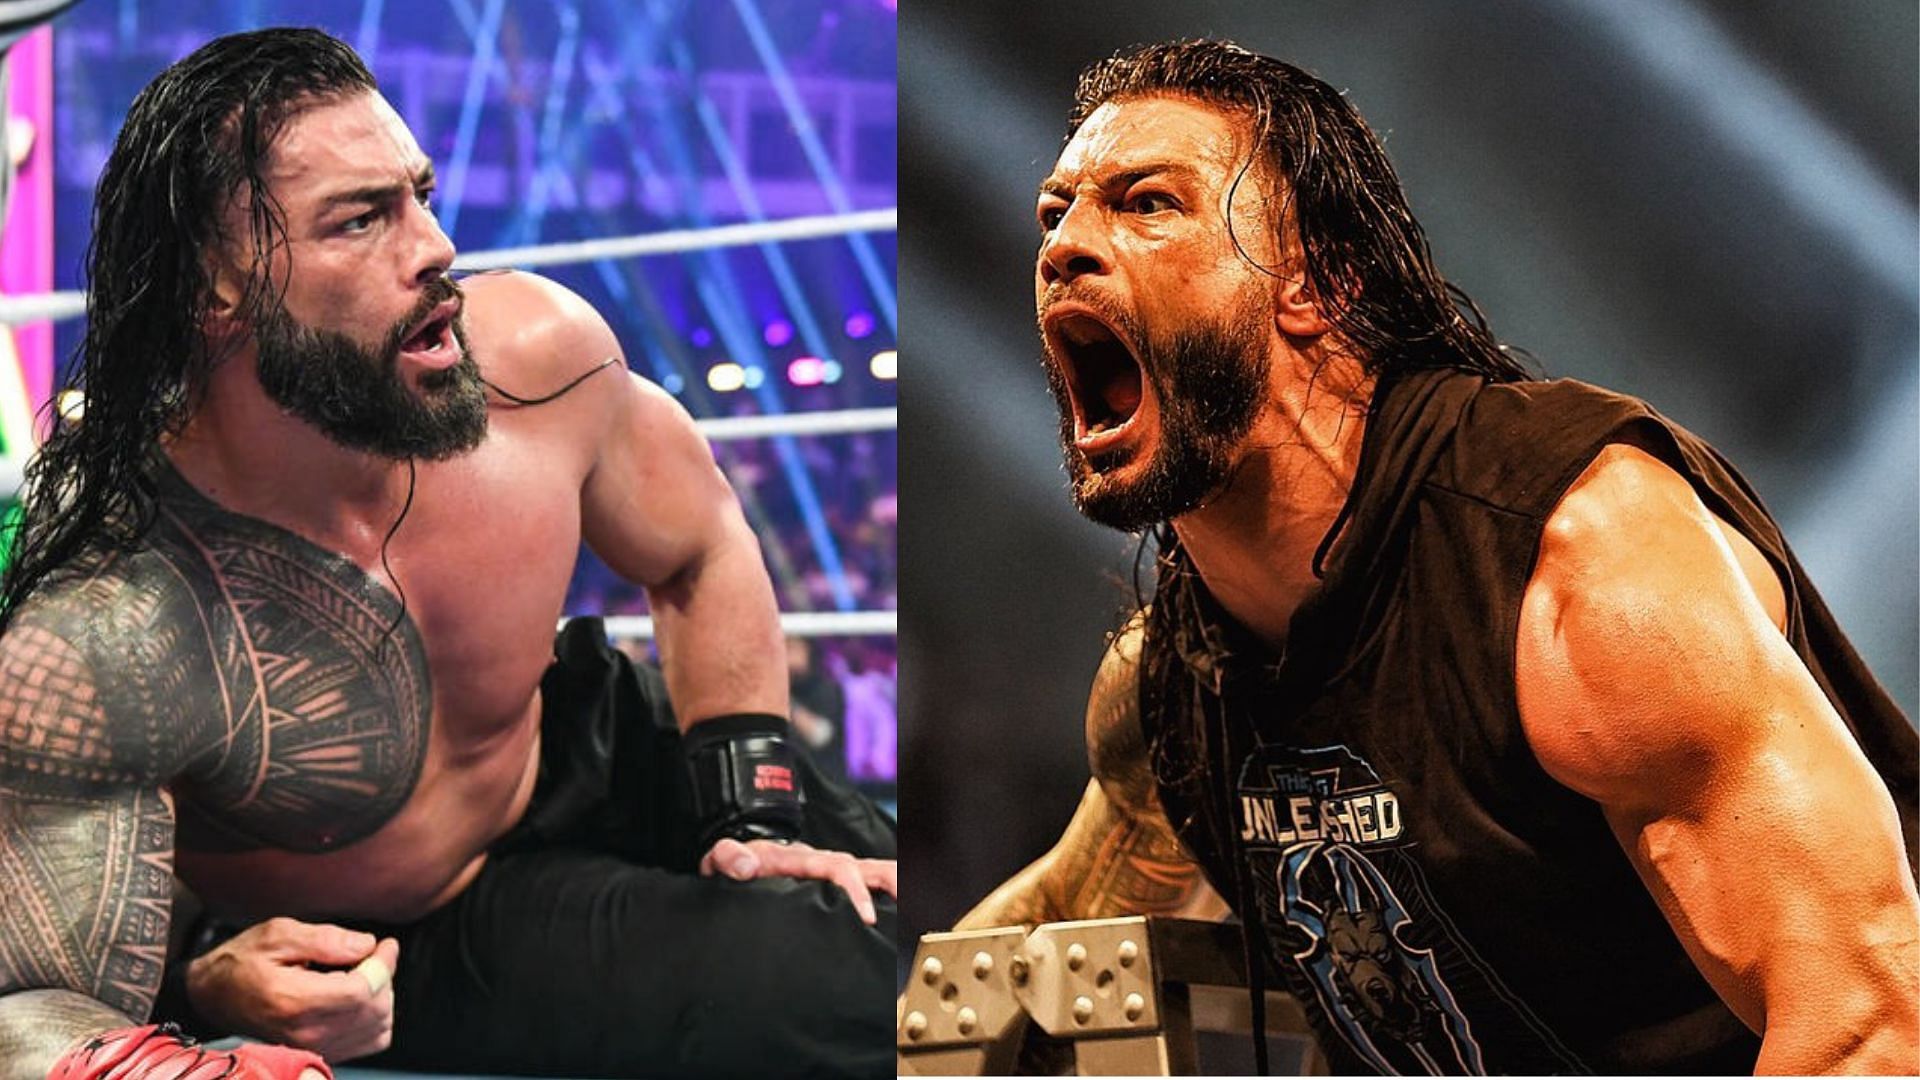 Is the end near for Roman Reigns?